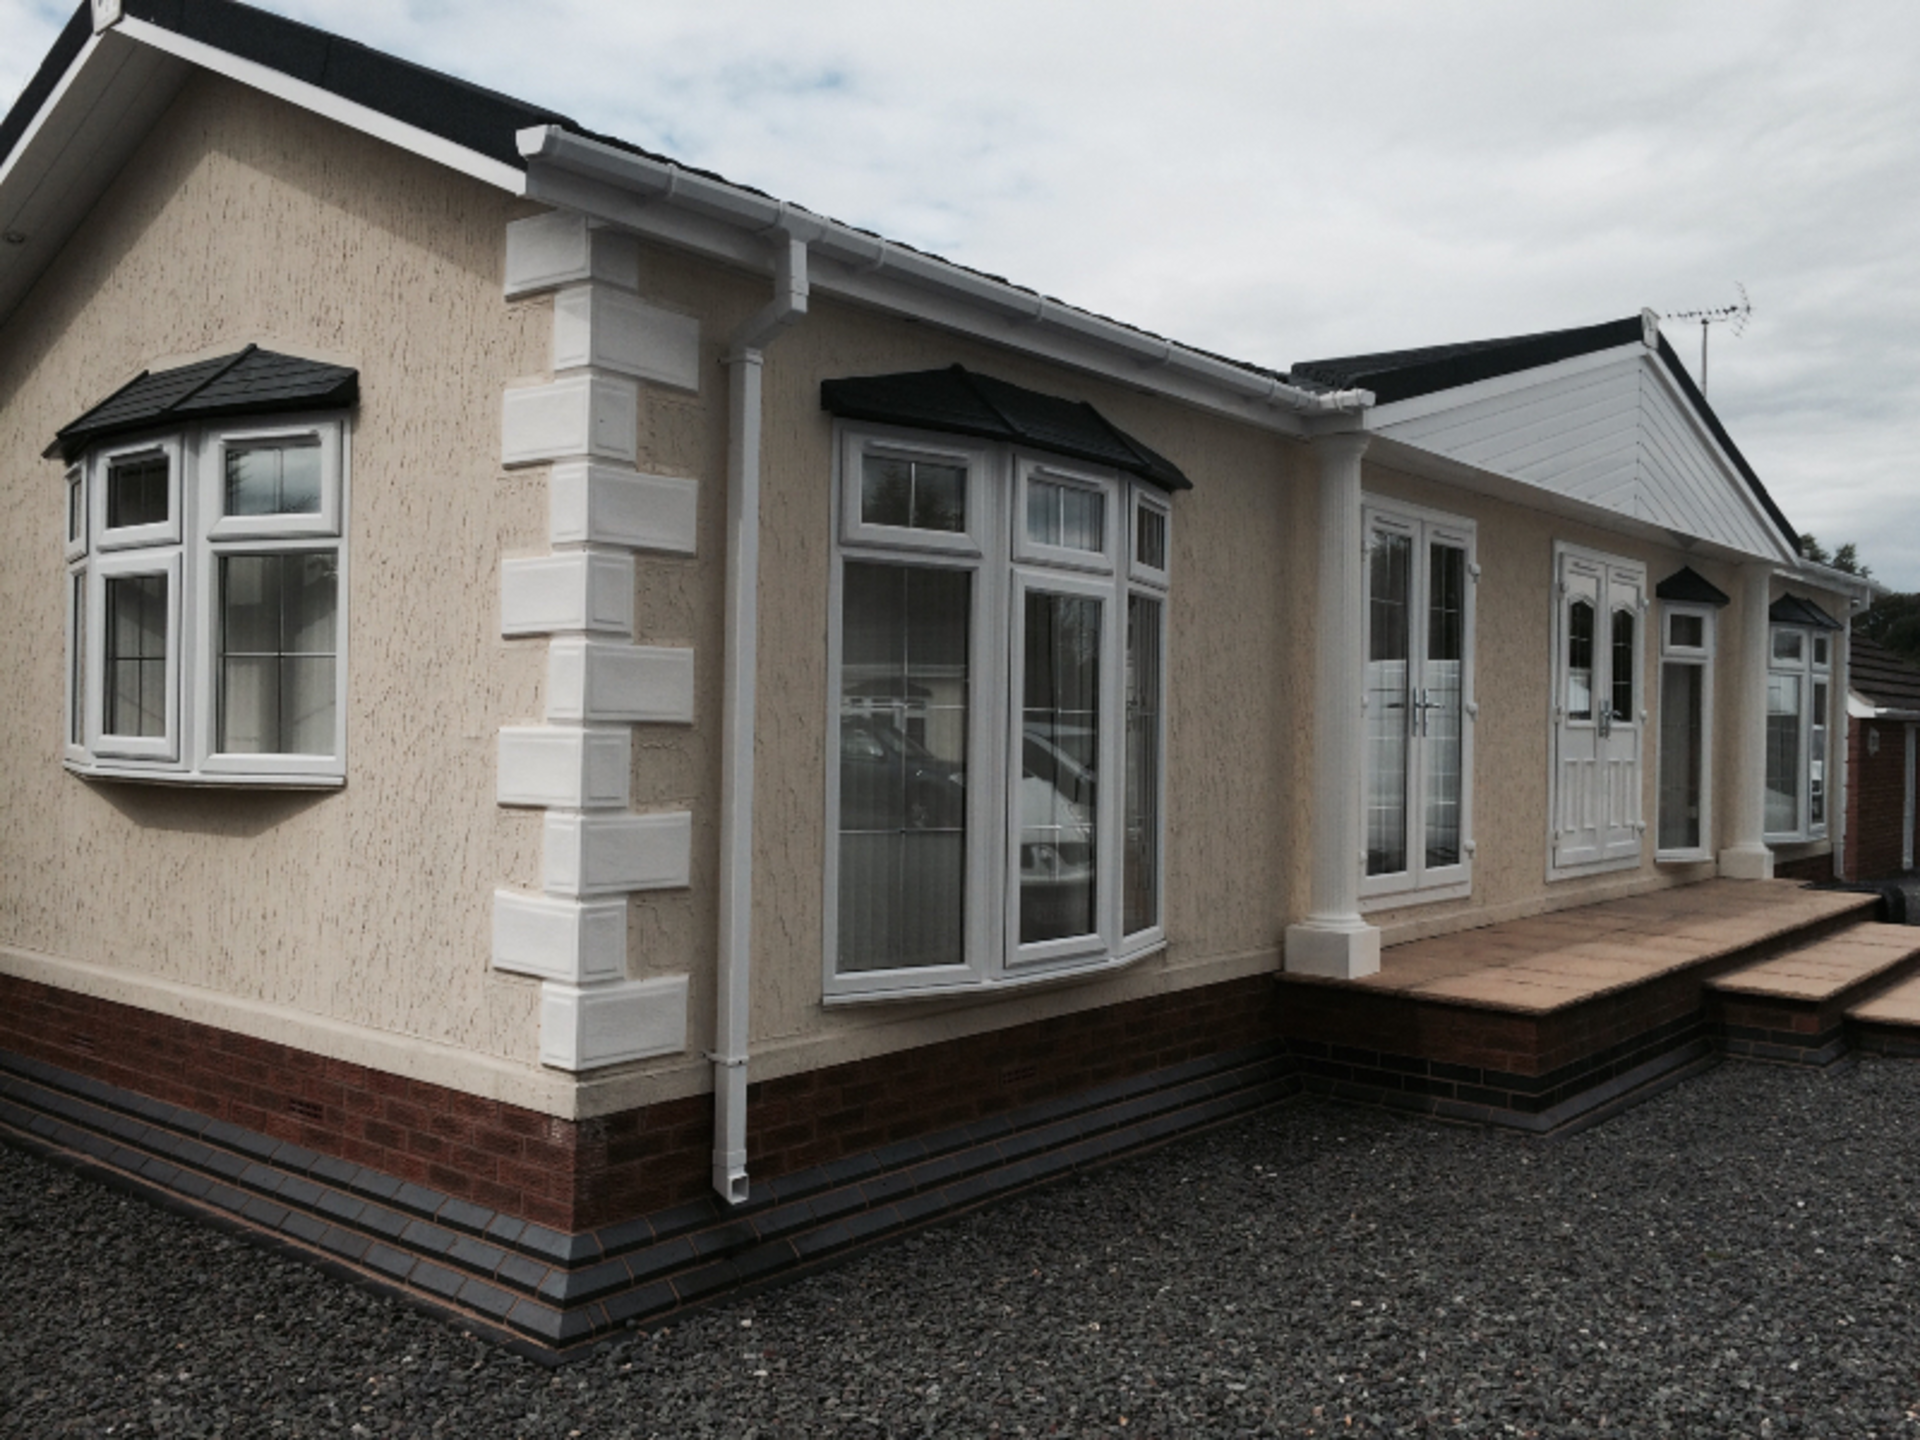 WILTSHIRE MOBILE PARK HOME 48FT X 14FT - 3 BEDROOM LUXURY CHALET - MASSIVE SPEC - 1 OWNER FROM NEW!! - Image 2 of 15